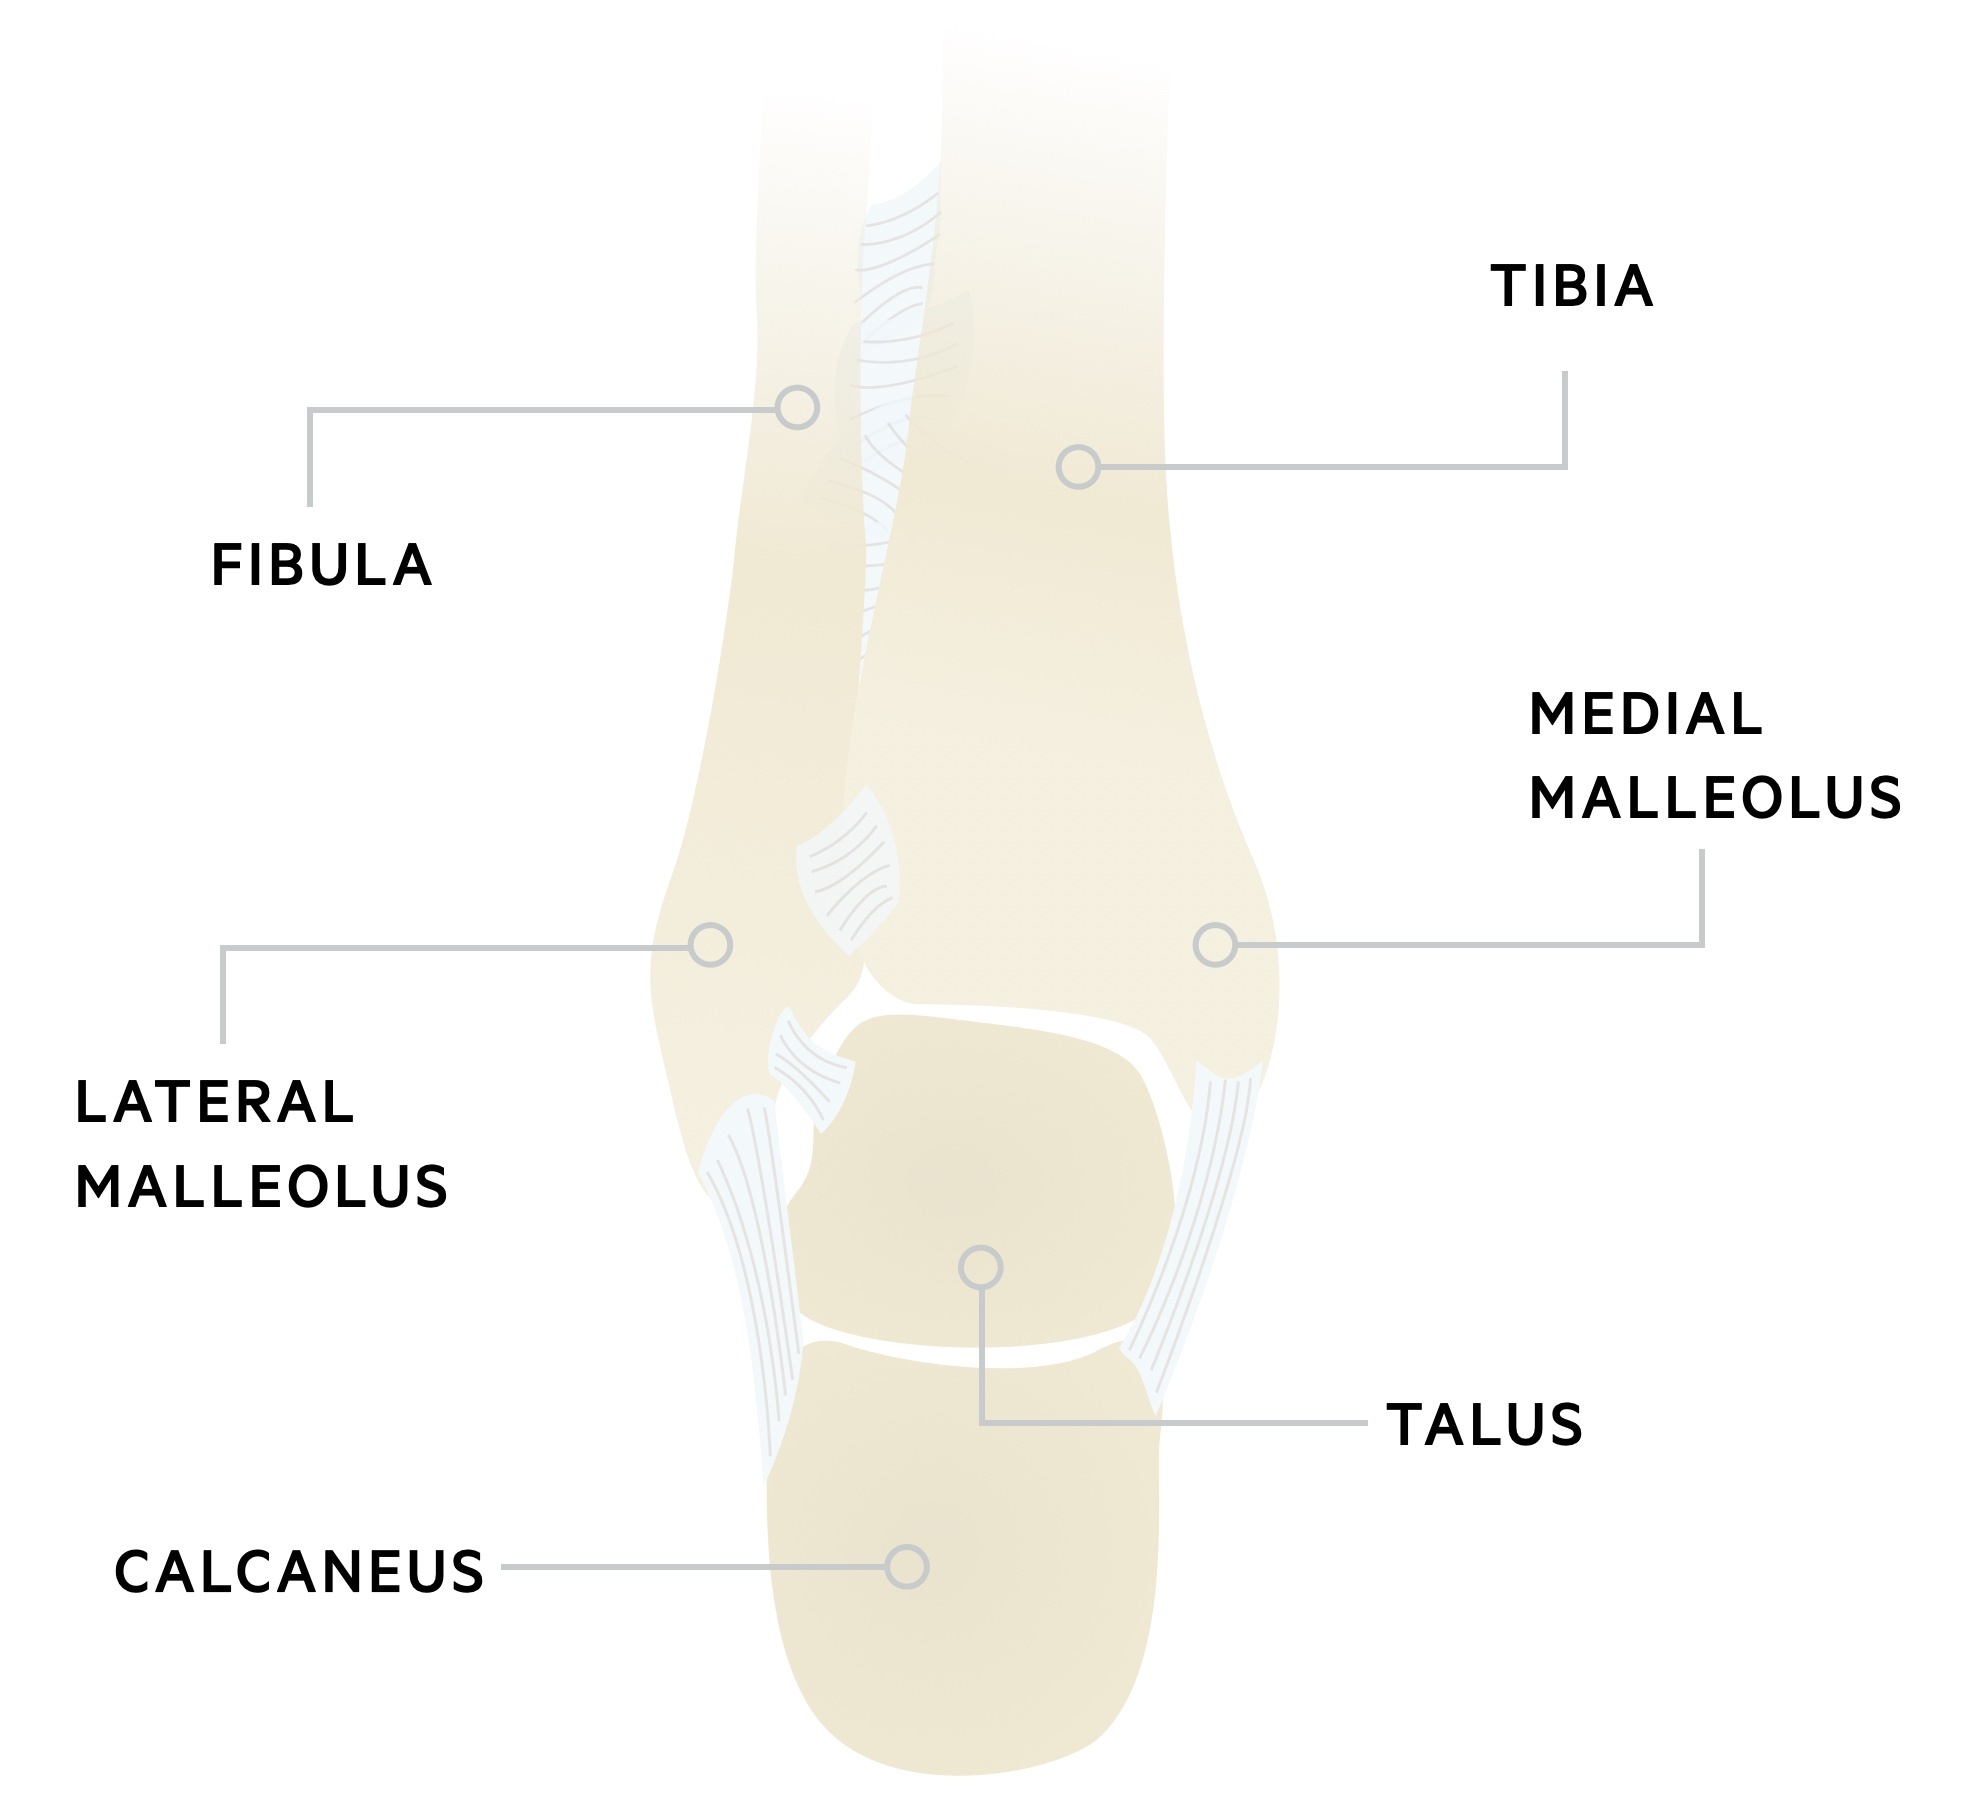 Anatomy of the ankle joint